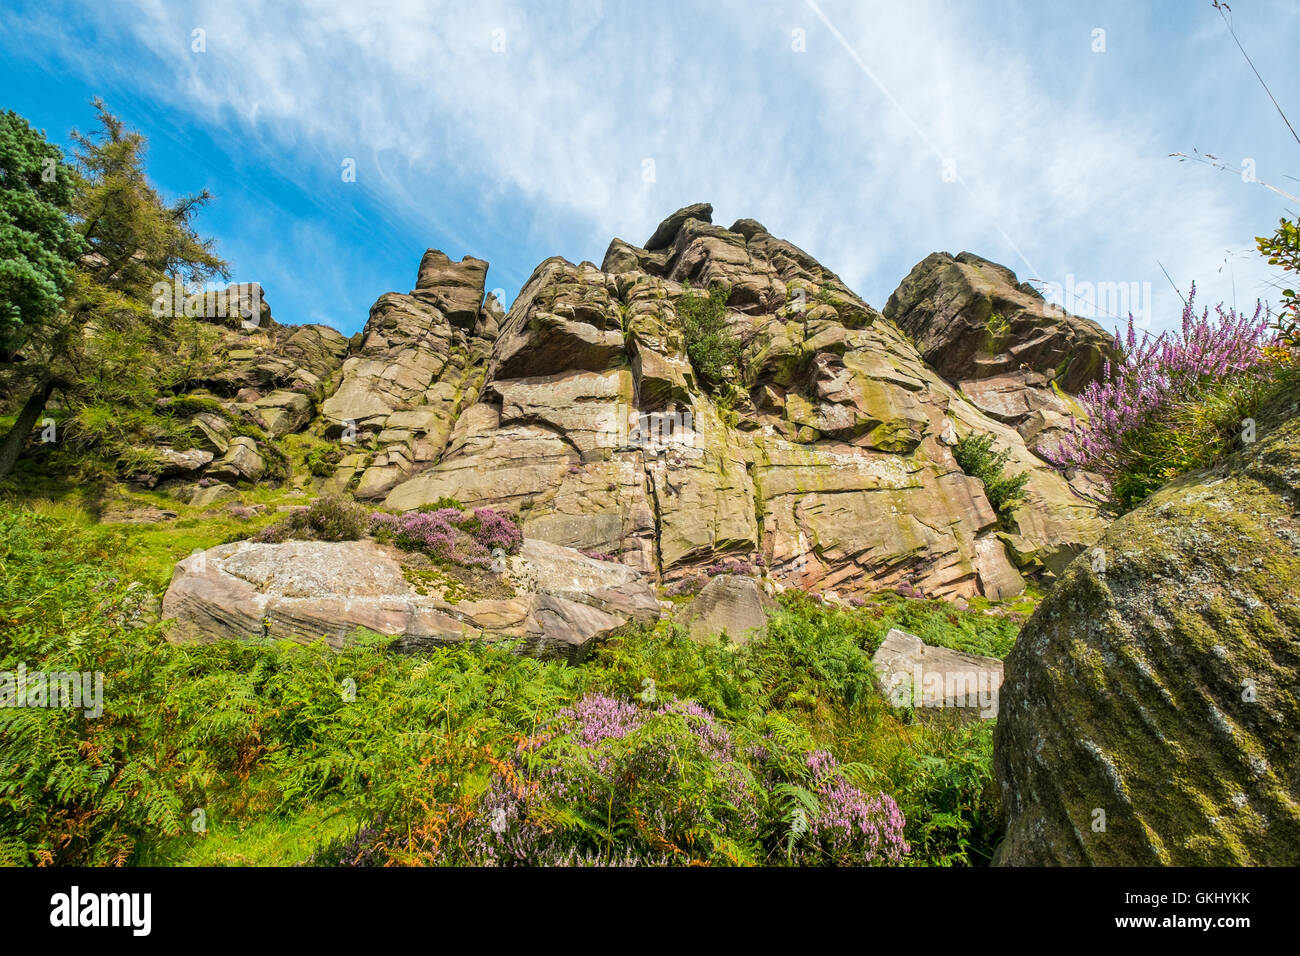 The Upper Tier of The Roaches, a popular gritstone climbing crag in the Peak District National Park Stock Photo